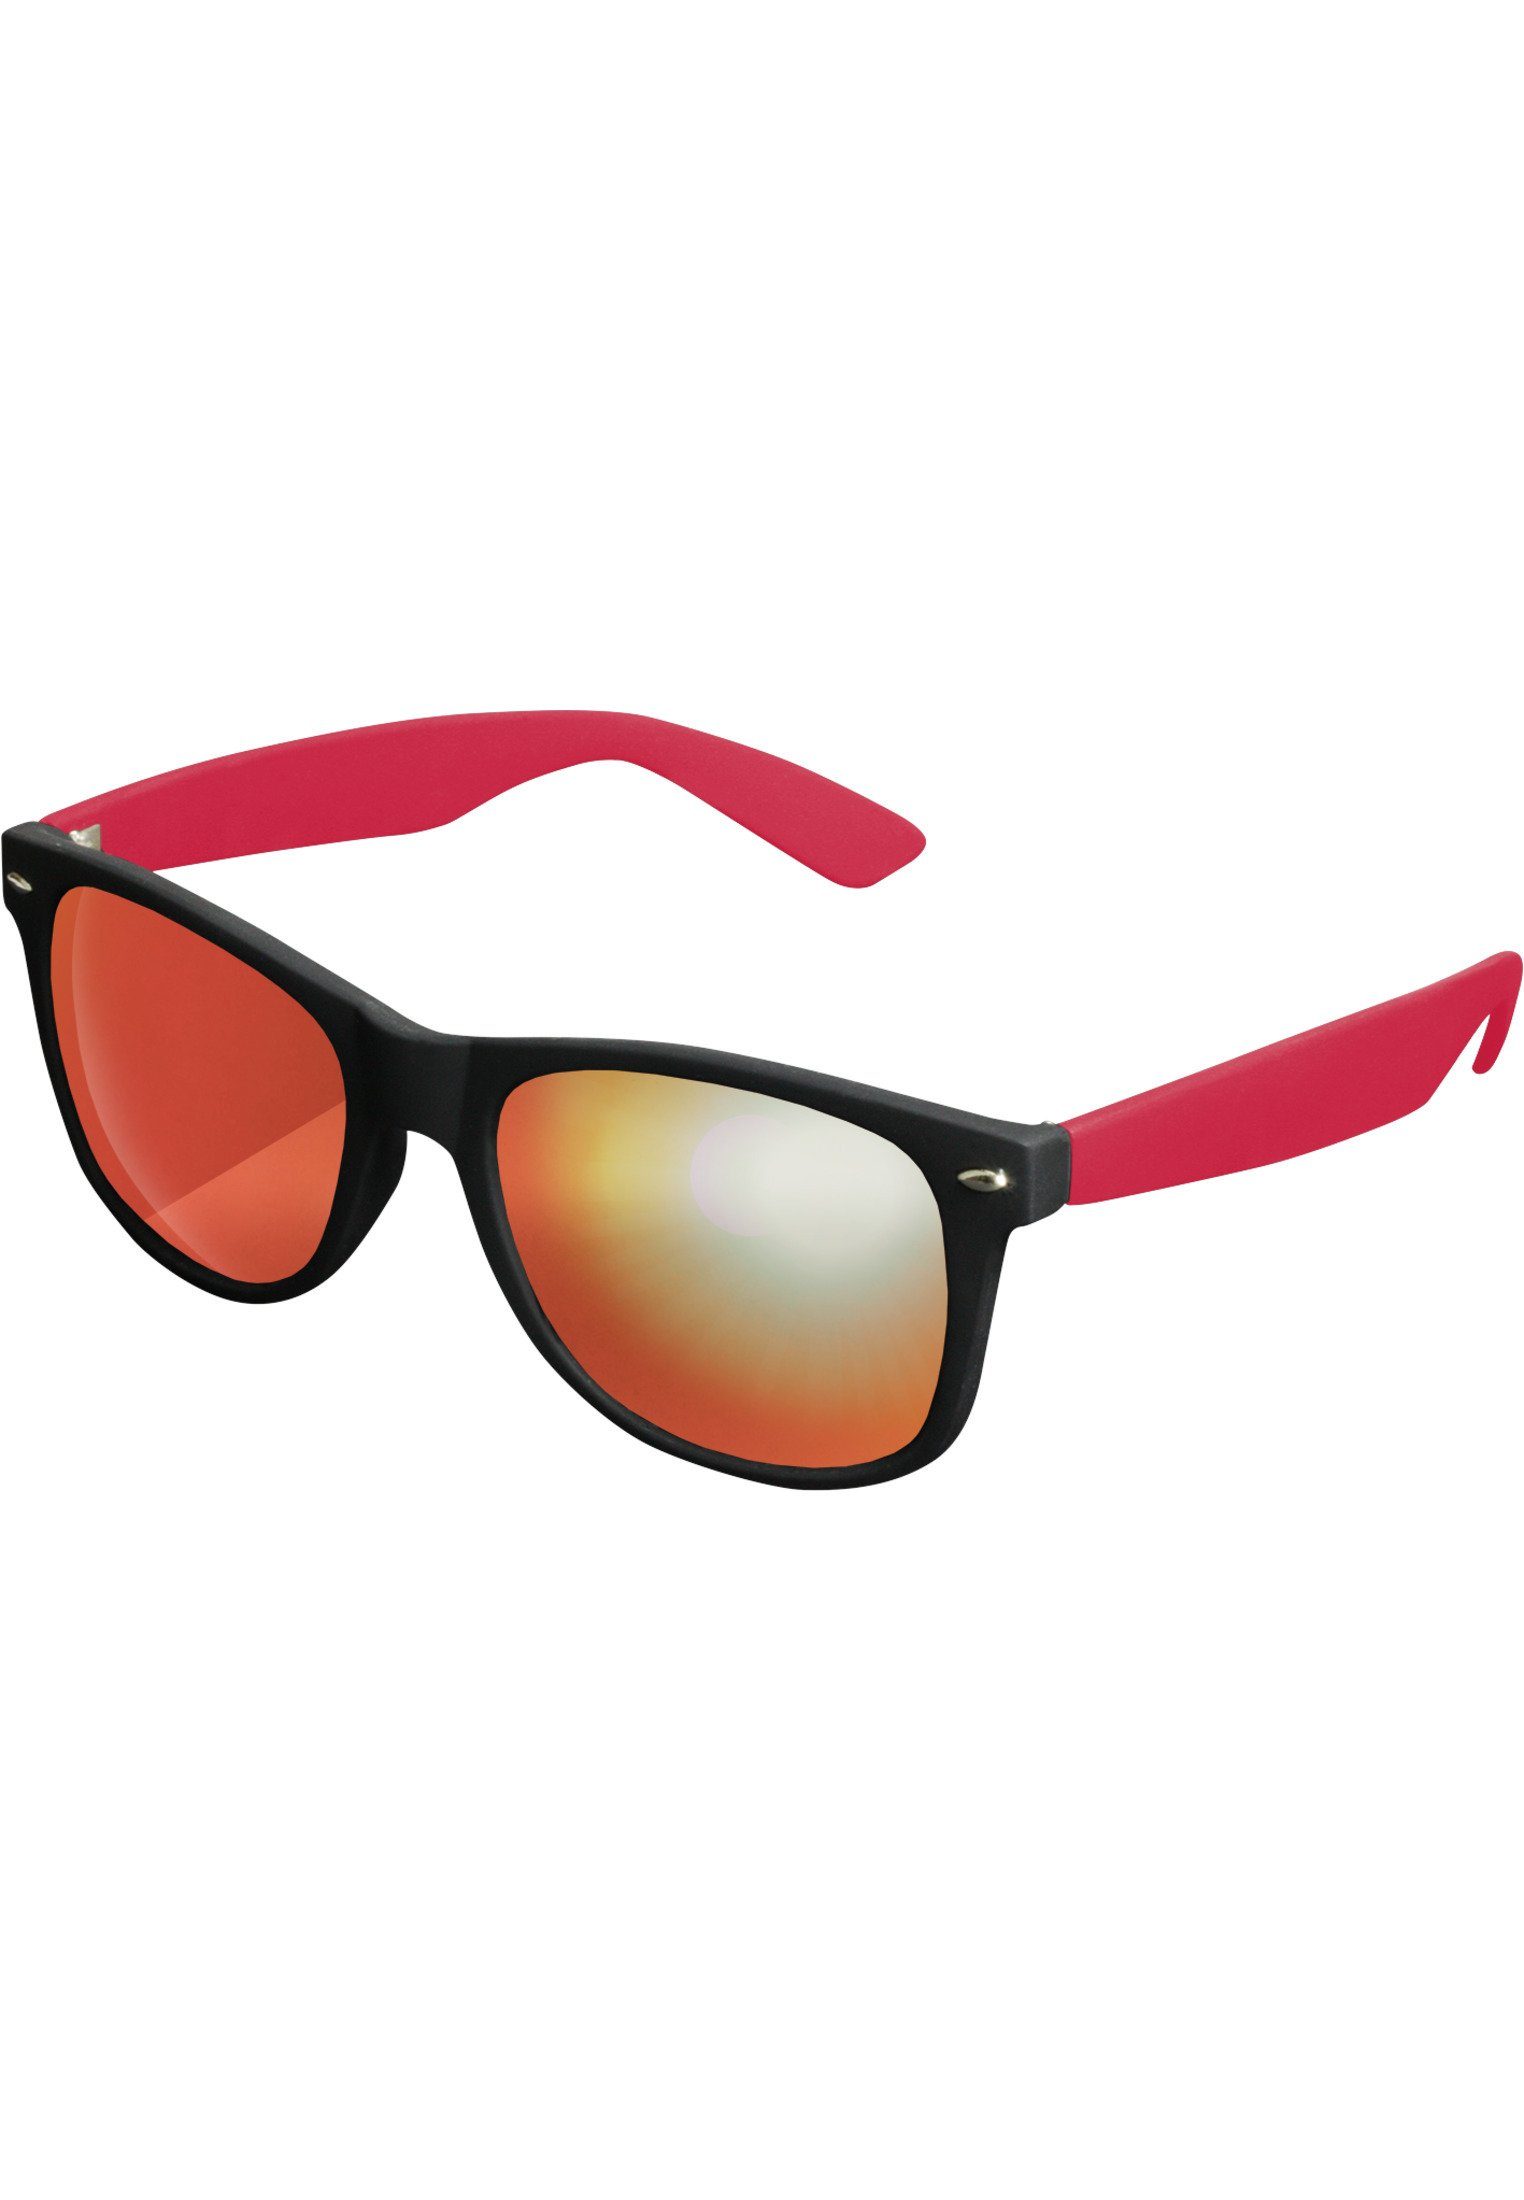 Sonnenbrille Likoma Sunglasses blk/red/red MSTRDS Mirror Accessoires